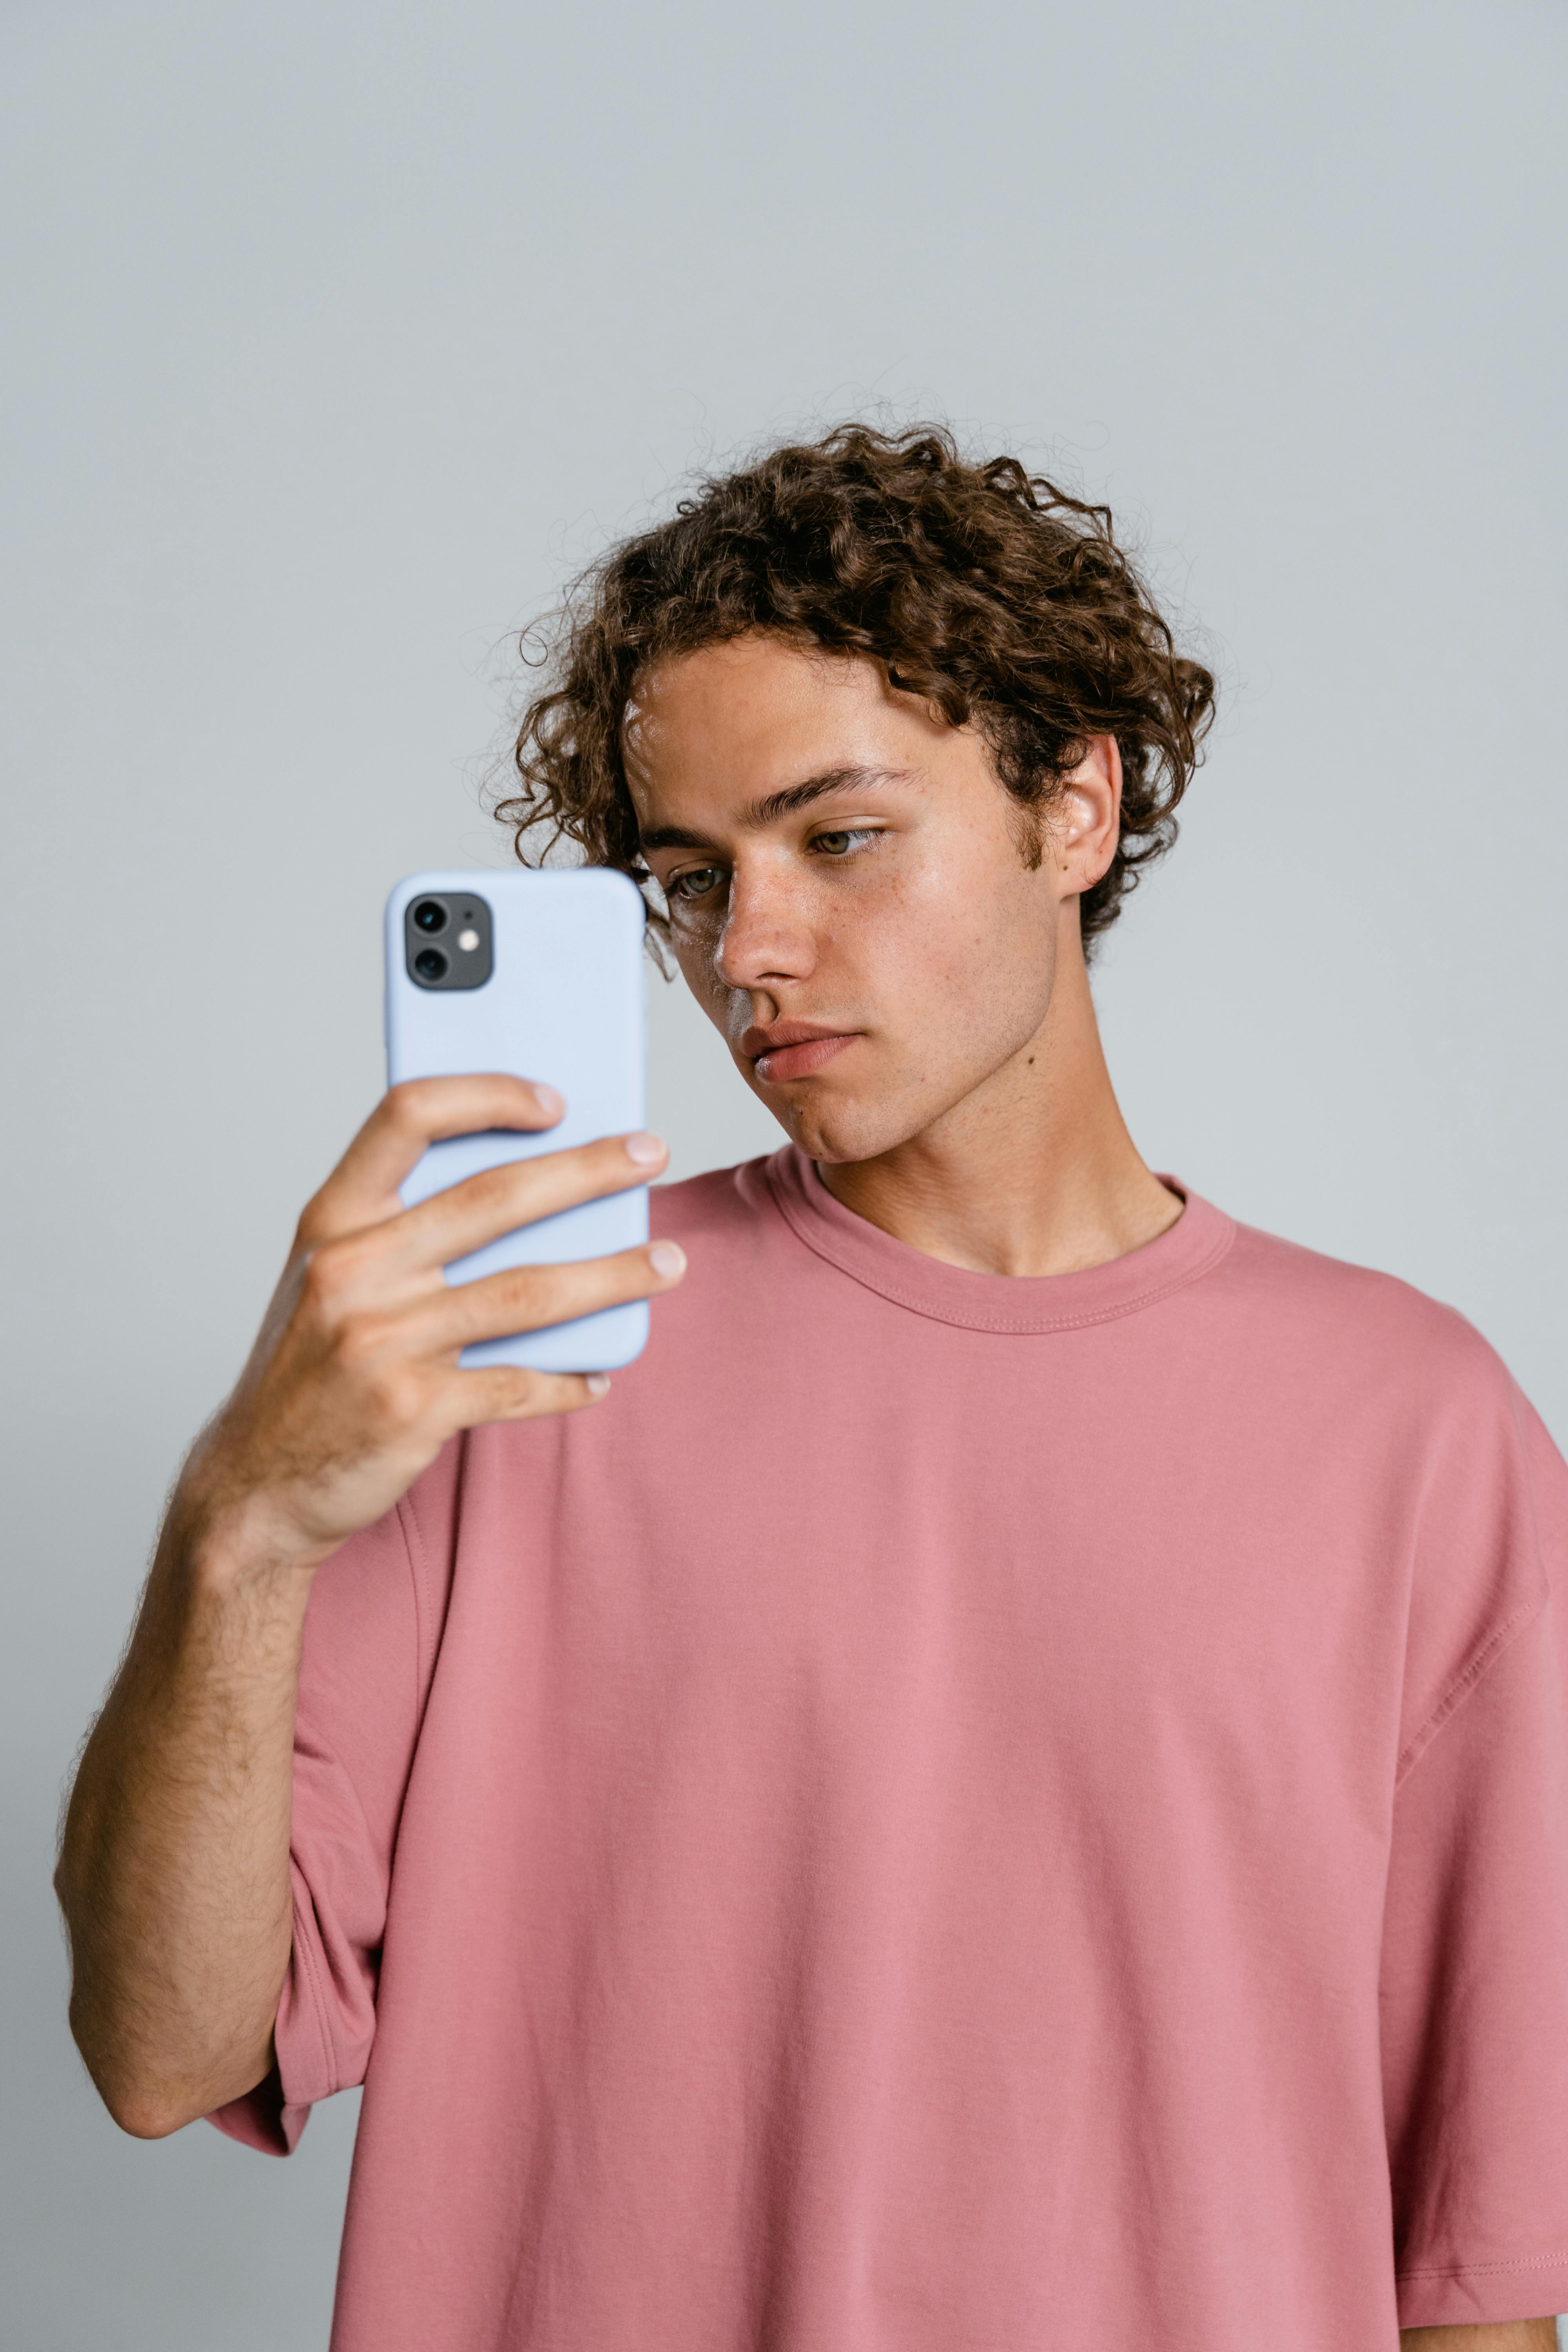 A teen on his phone | Source: Pexels